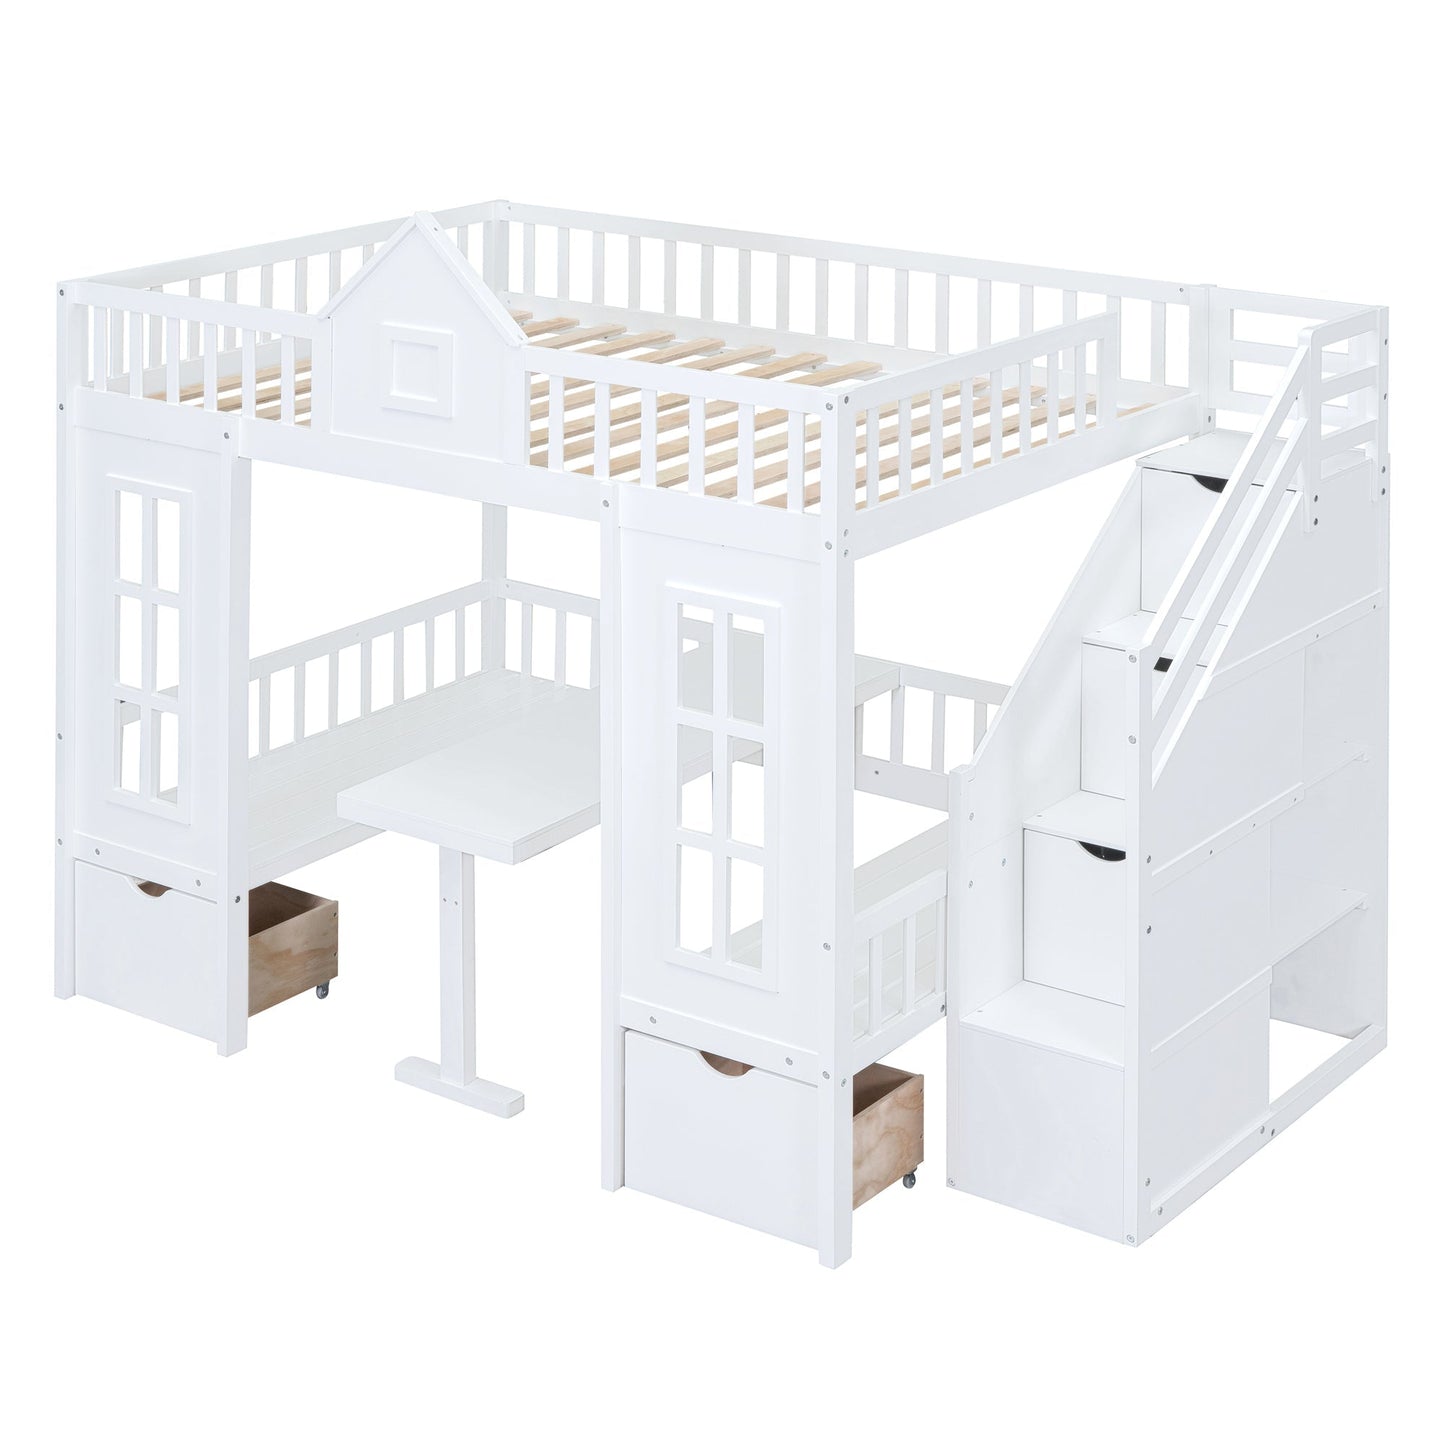 Full-Over-Full Bunk Bed with Changeable Table, Bunk Bed Turn into Upper Bed and Down Desk -White